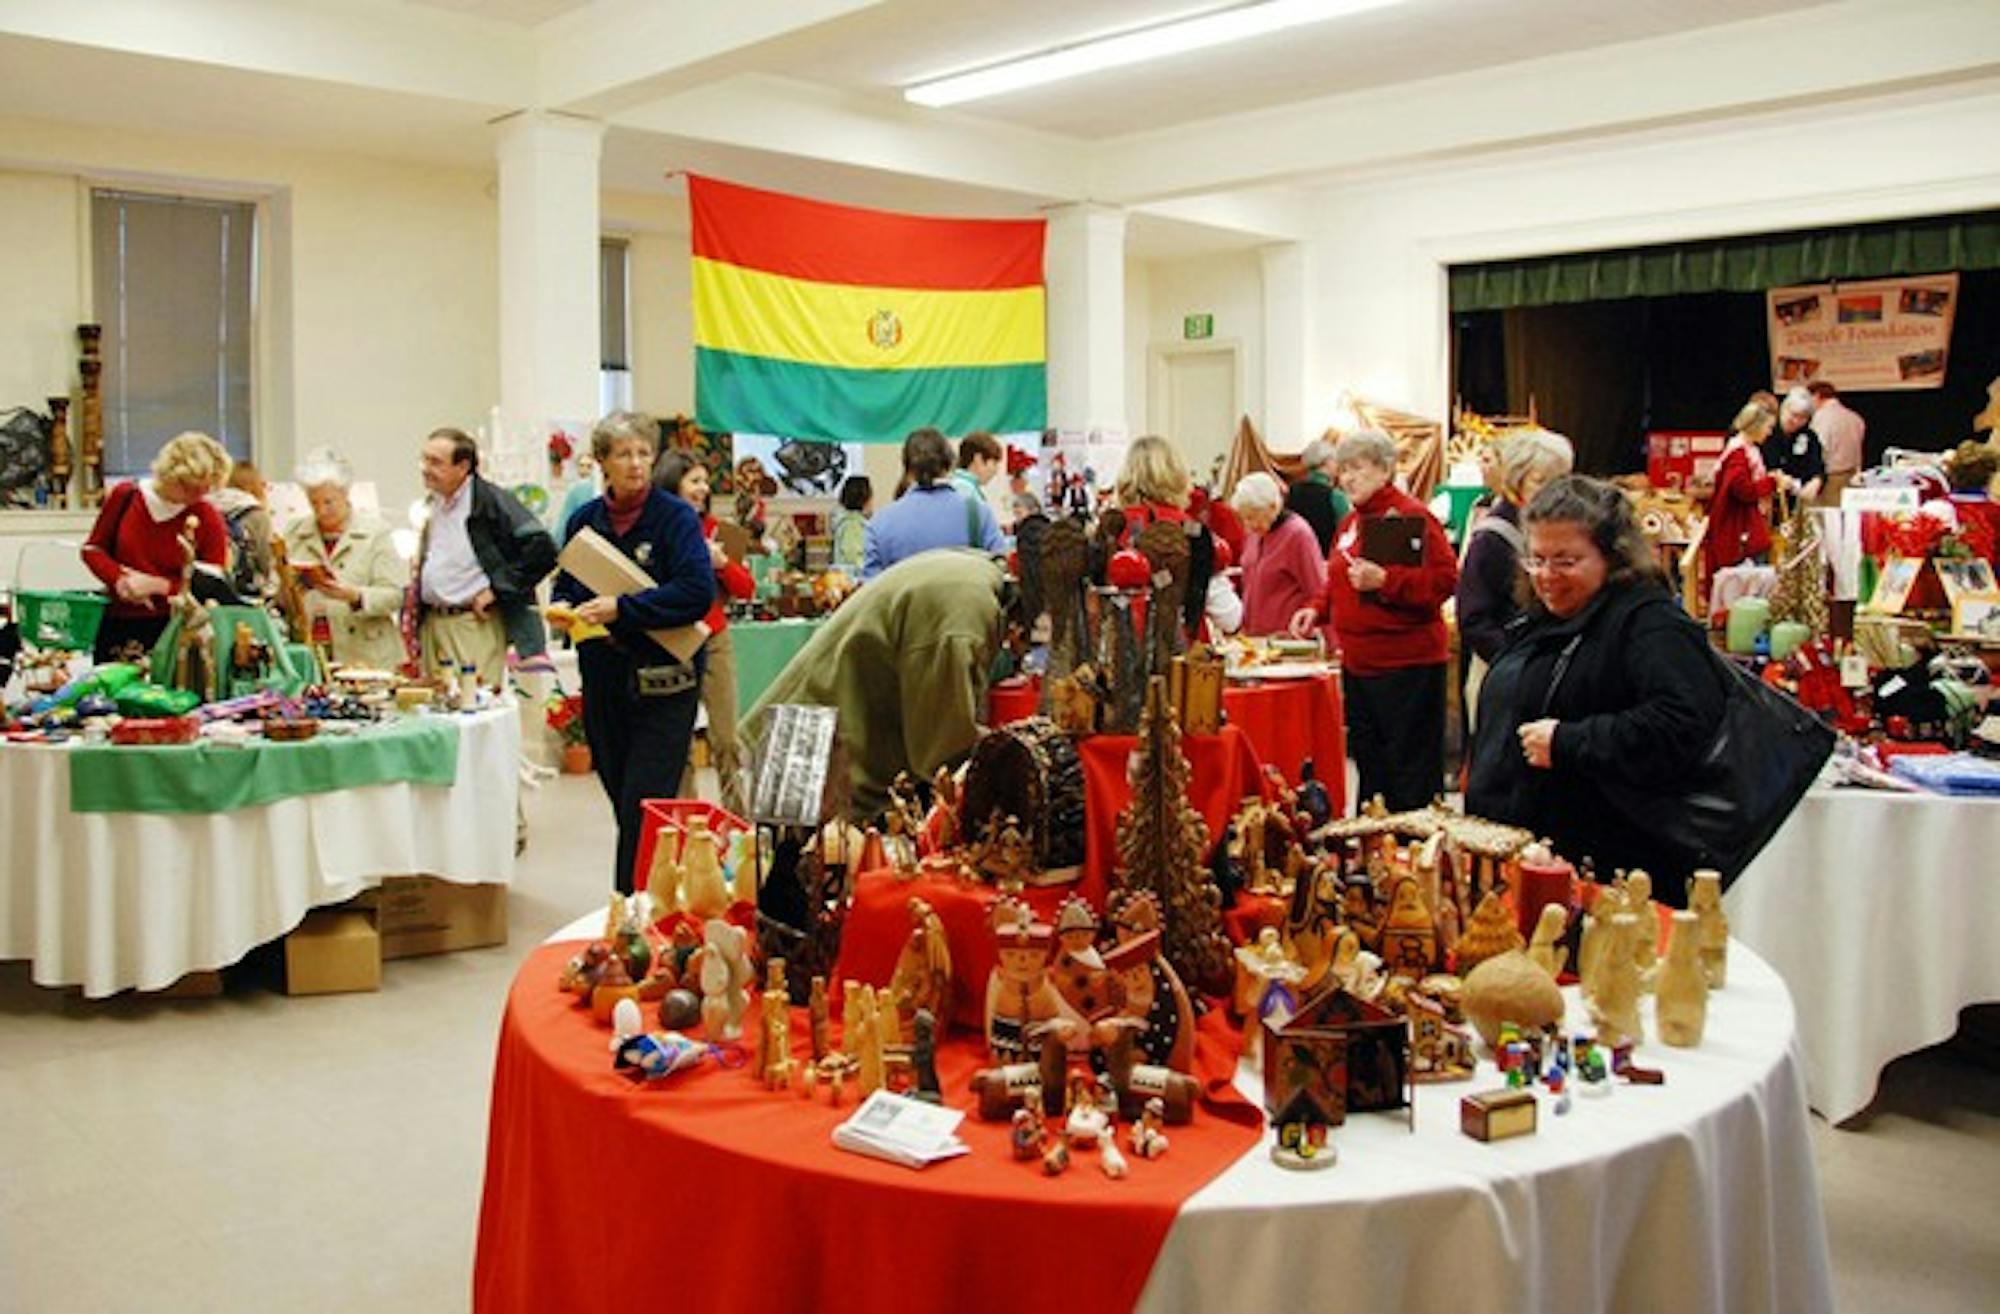 The Church of Christ's Christmas Market offers gifts from different non-profit and charitable groups from around the world. The groups then receive the proceeds from sales to support their membership.